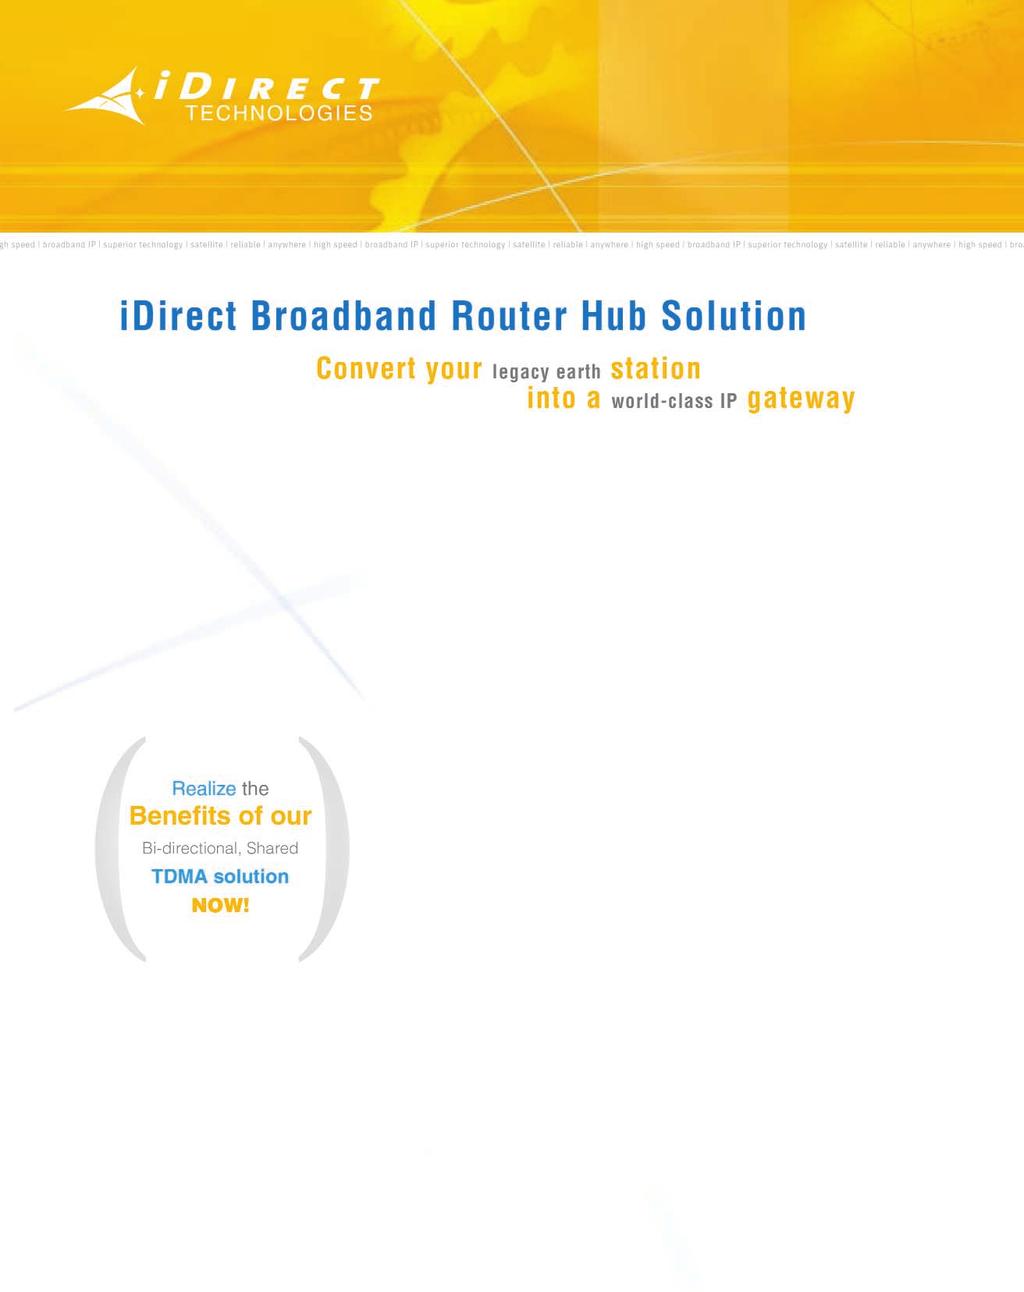 idirect Broadband Router Hub Solutions A GROWING OPPORTUNITY There is enormous demand for high-speed broadband IP services, especially in remote areas poorly served by land-based solutions.